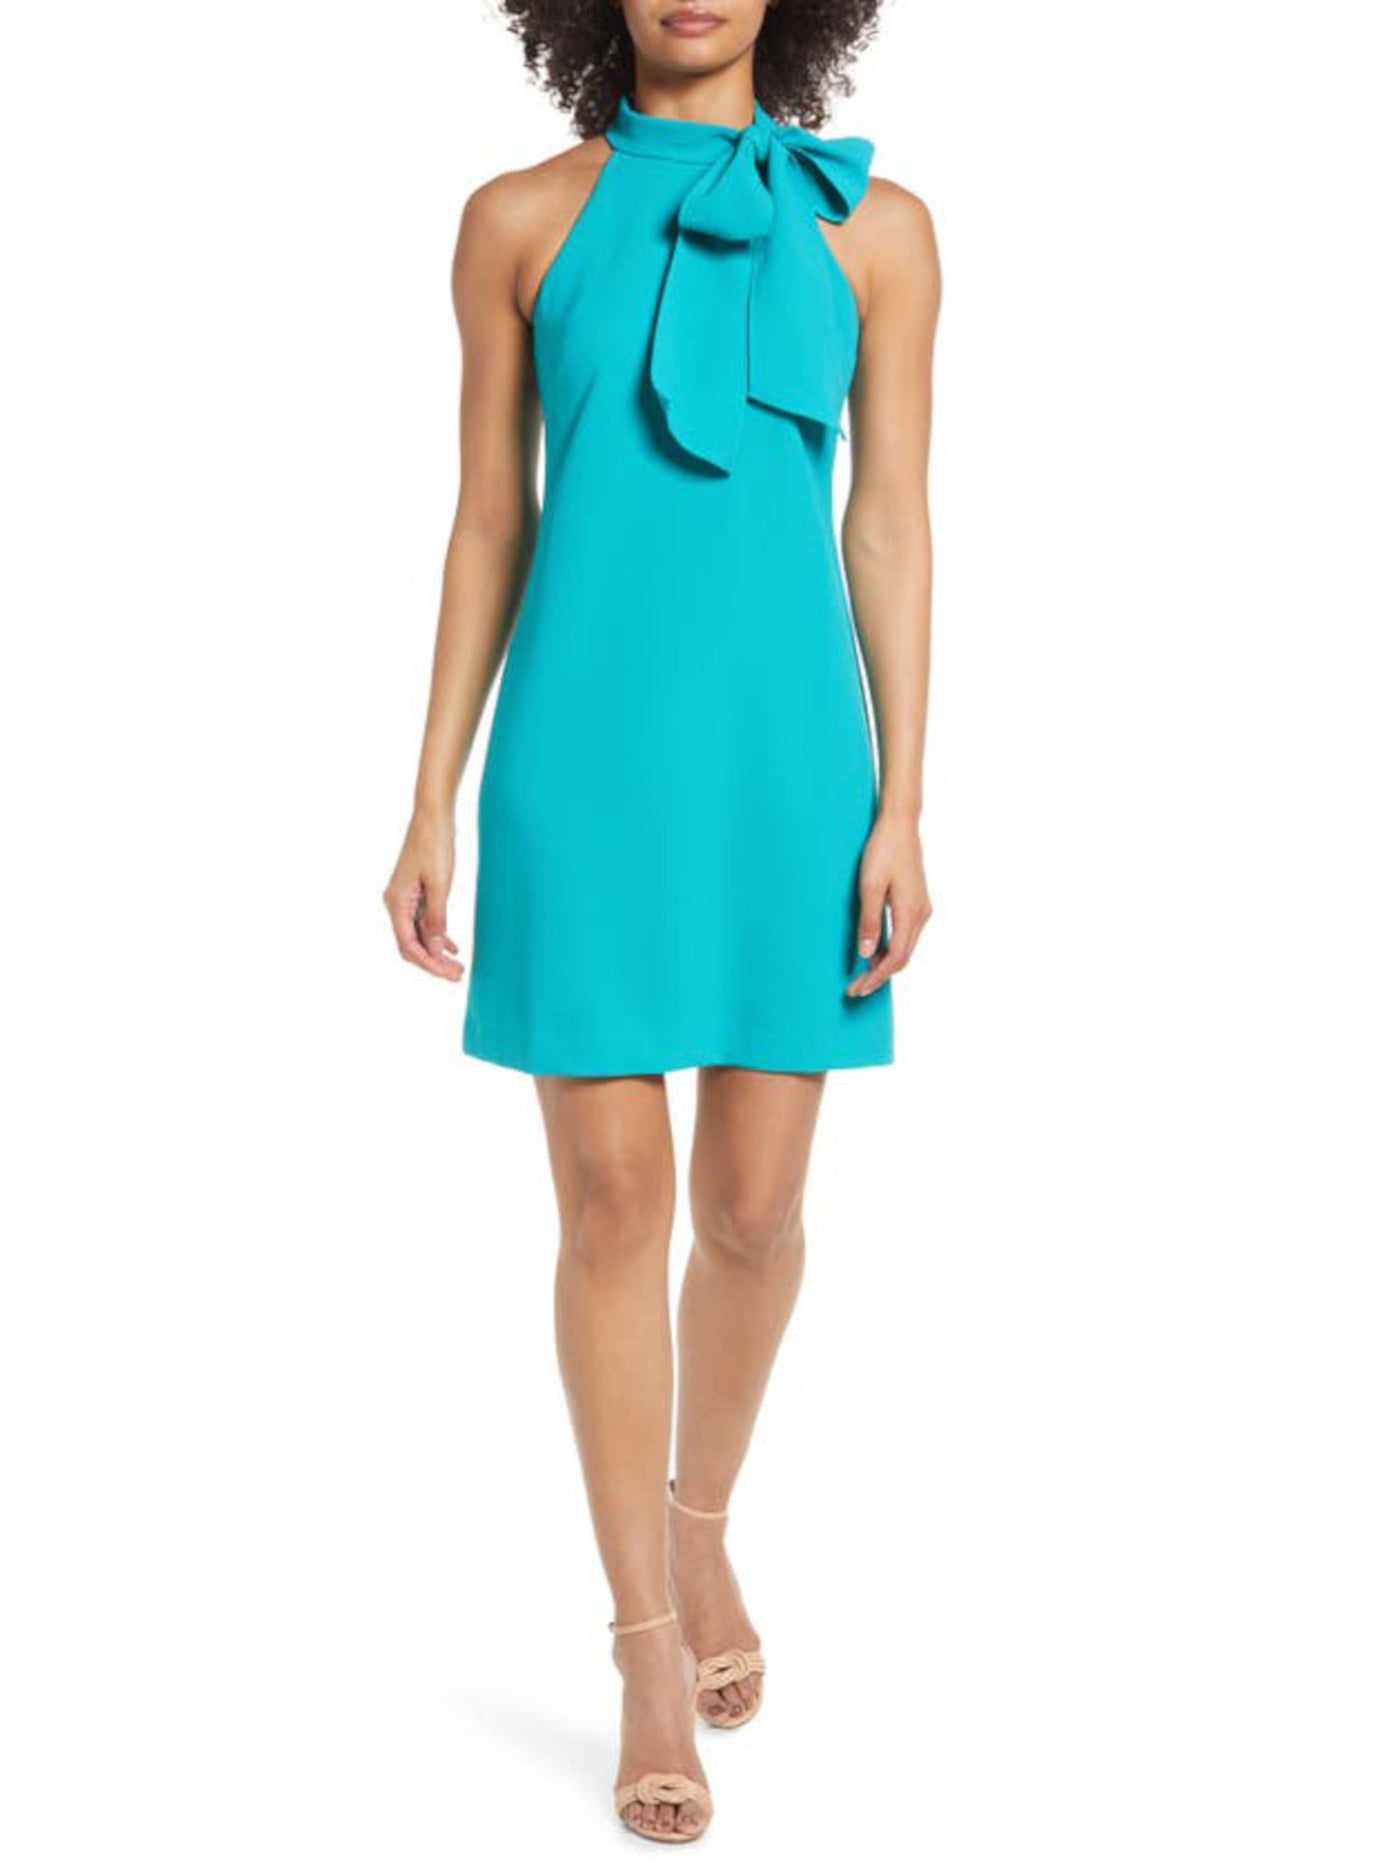 VINCE CAMUTO Womens Turquoise Stretch Zippered Darted Bow Detail Lined Textured Sleeveless Halter Short Wear To Work Shift Dress 6